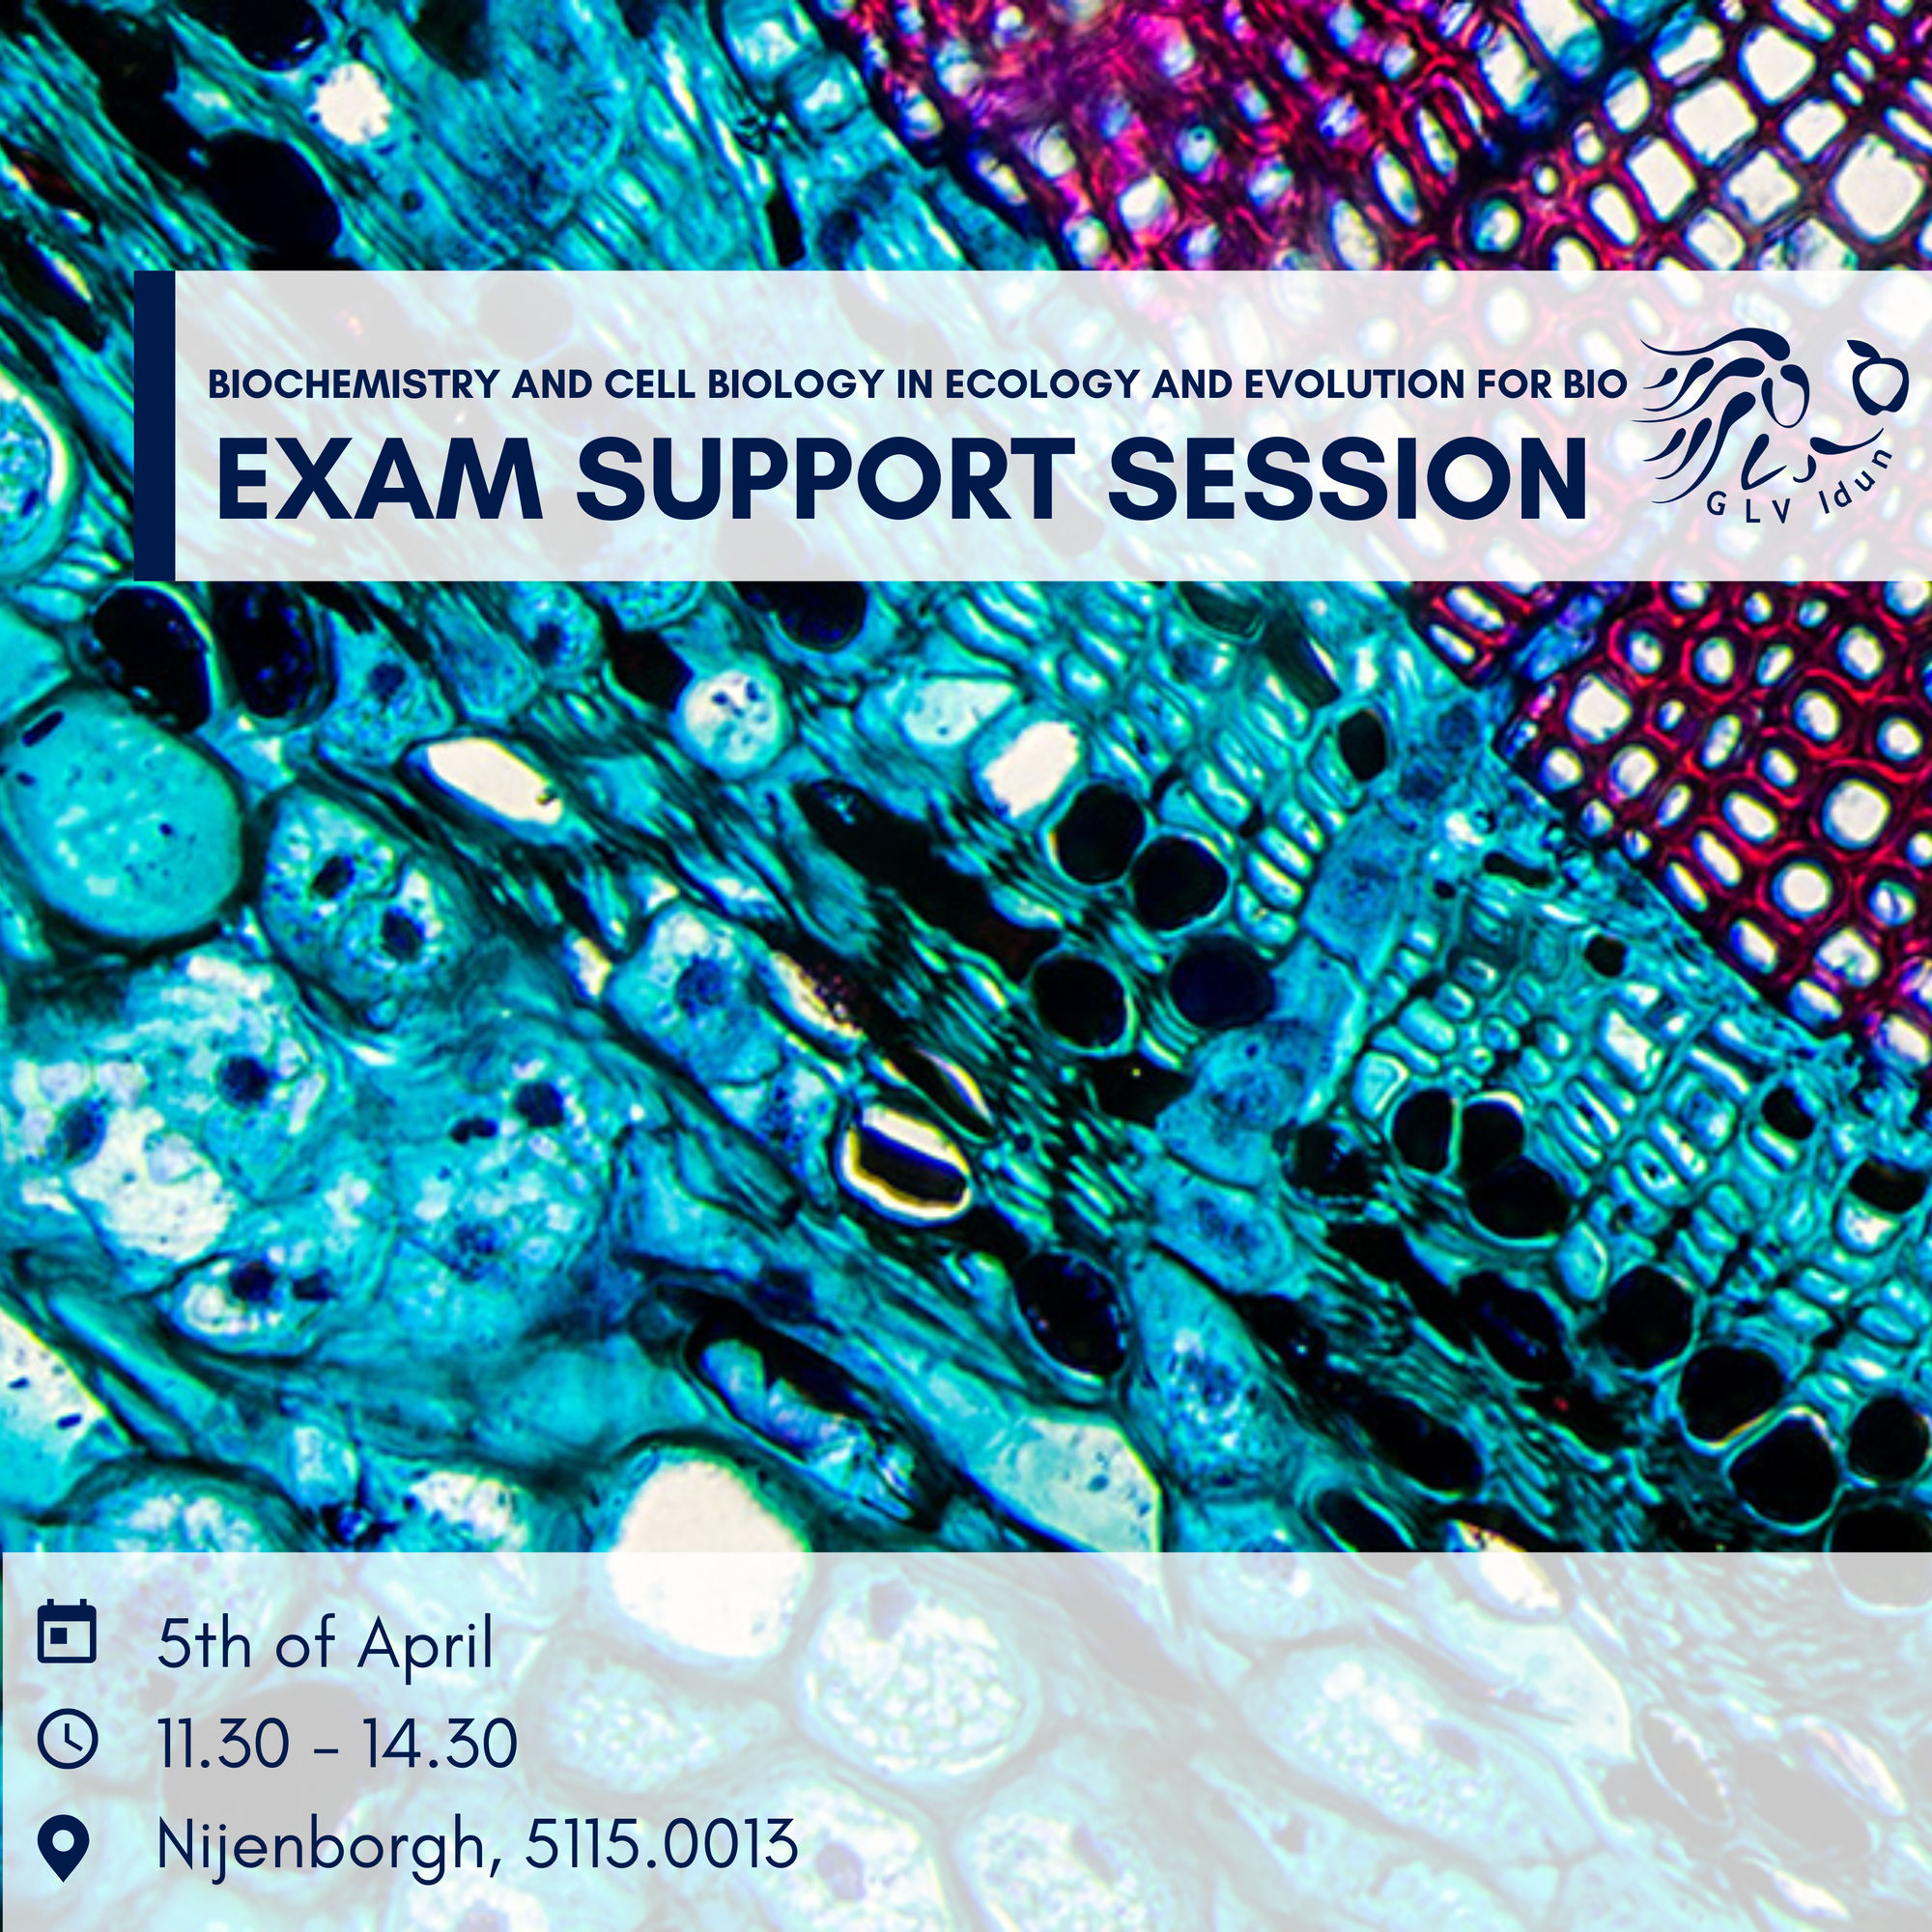 Exam Support Session: Biochemistry and Cell Biology in Ecology and Evolution